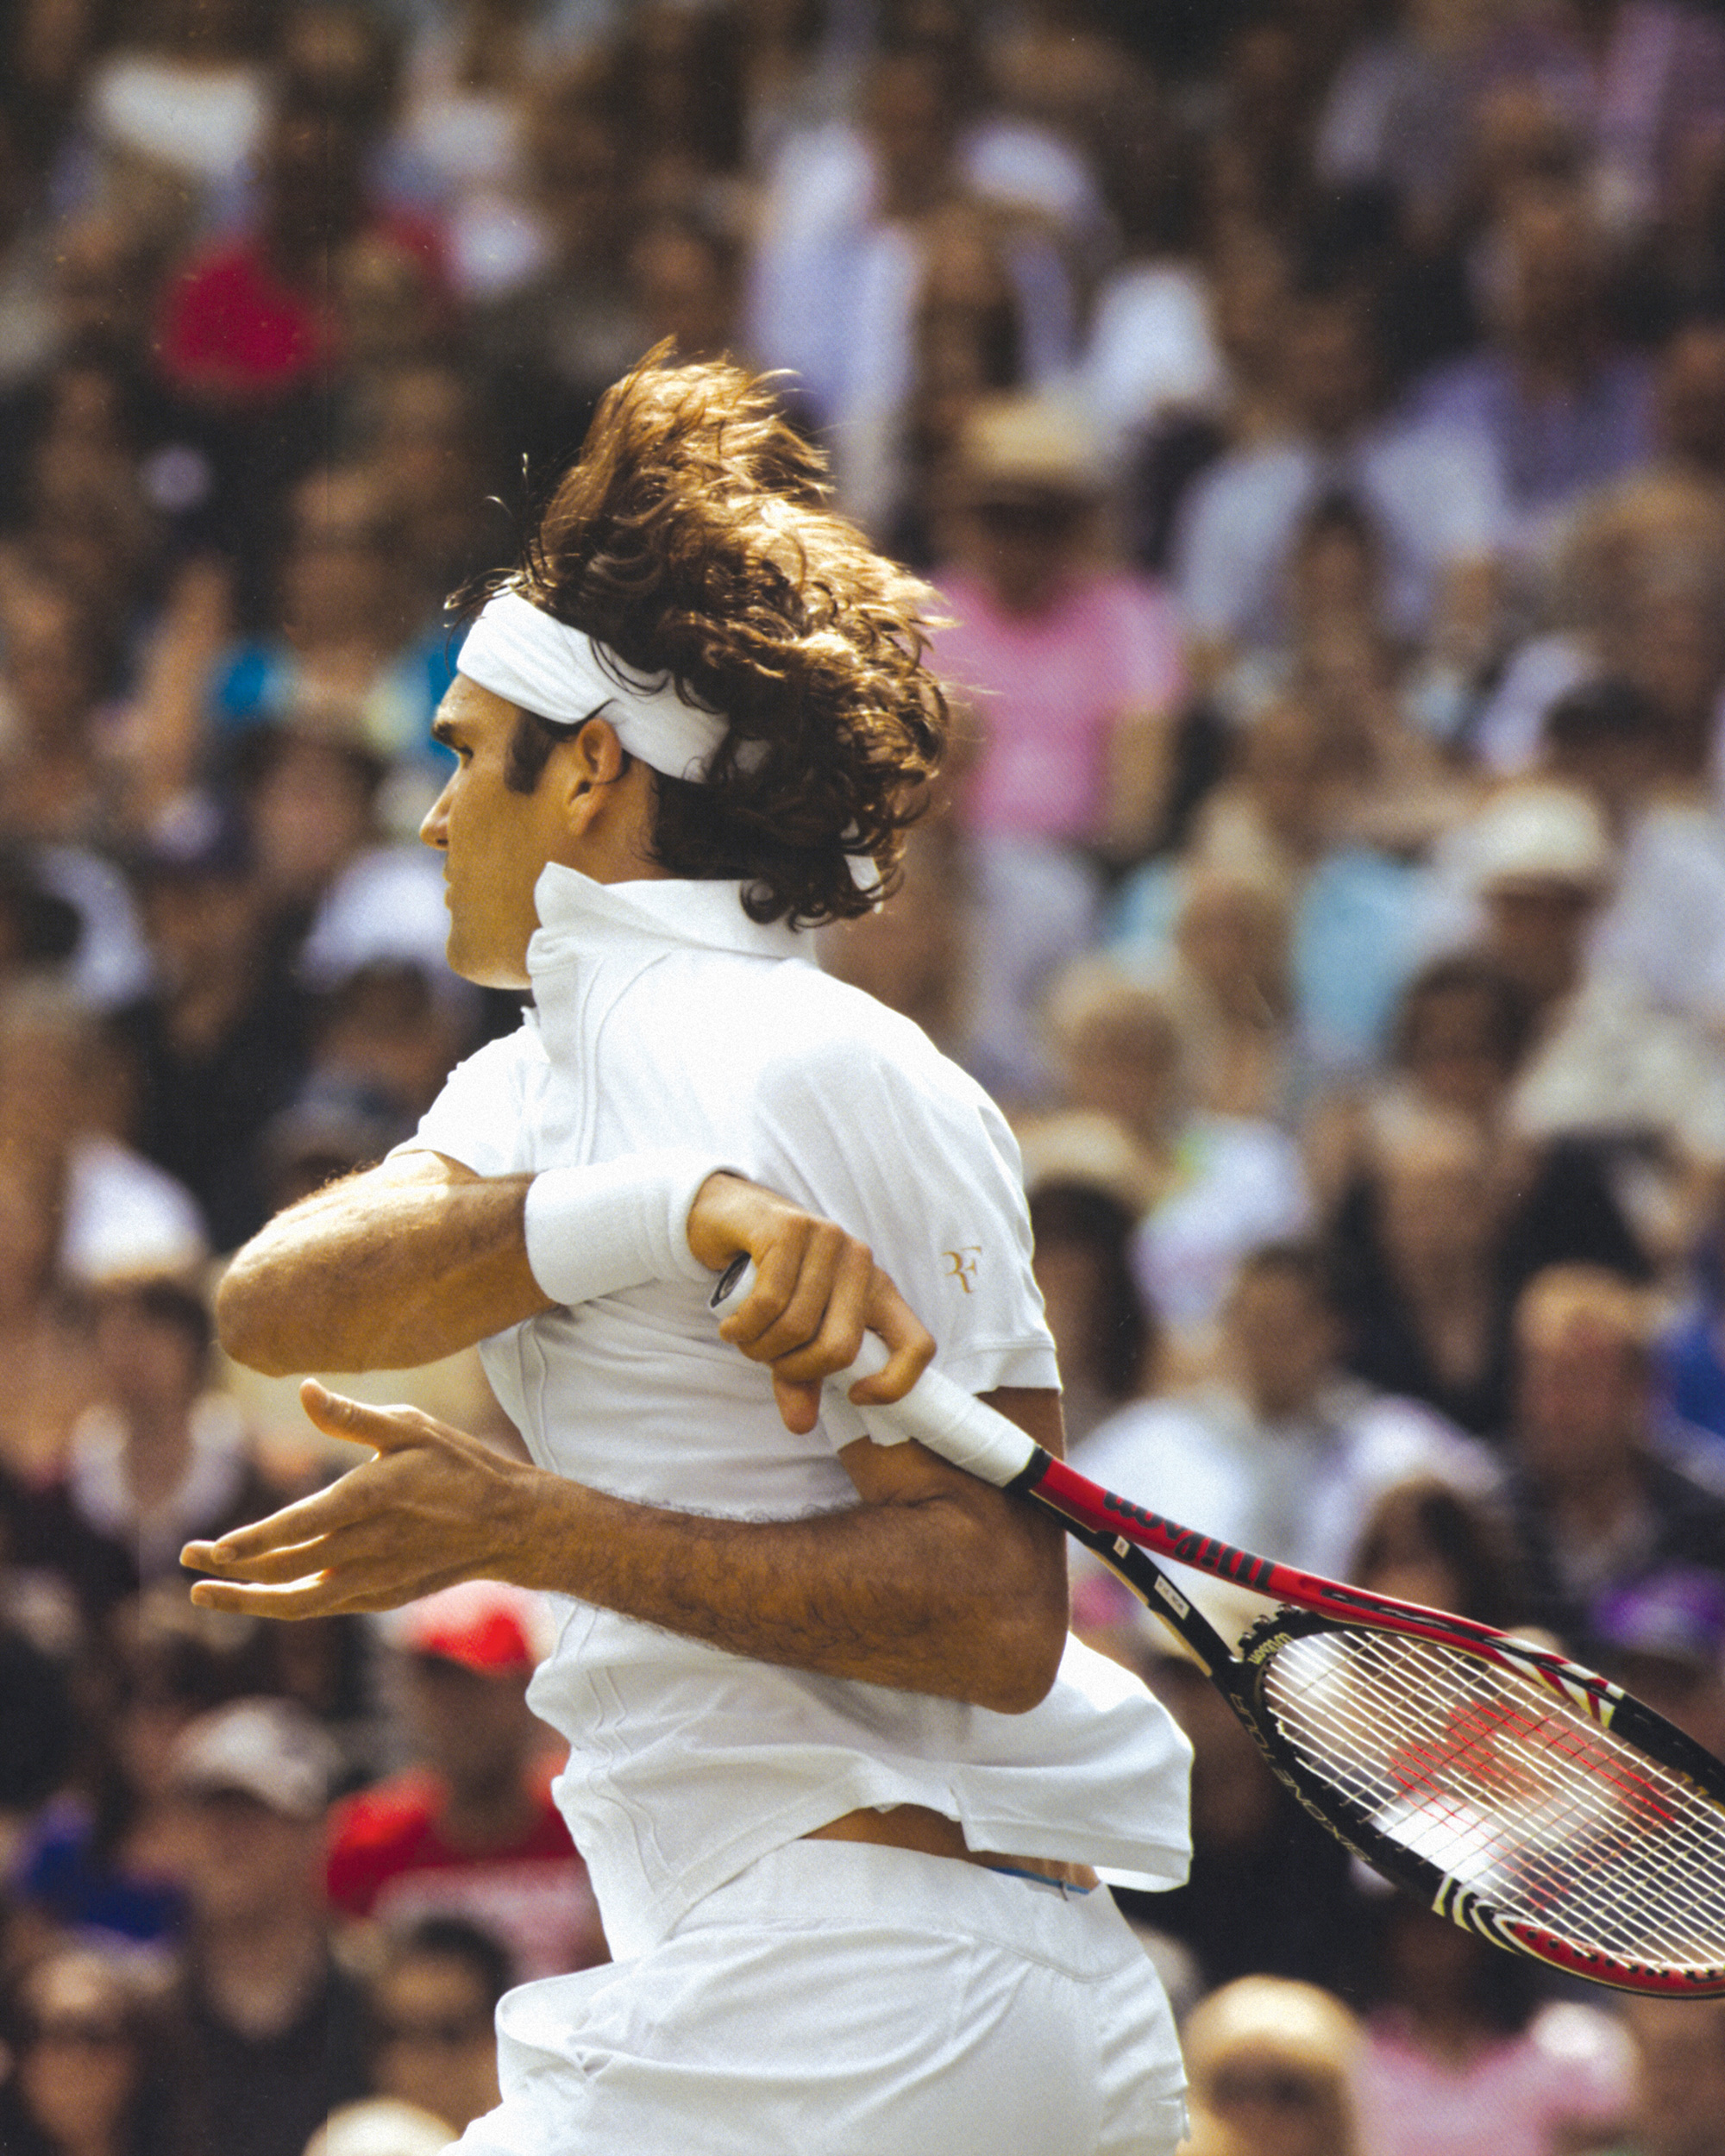 A photograph of Federer hitting a forehand at the two thousand and ten Wimbledon.